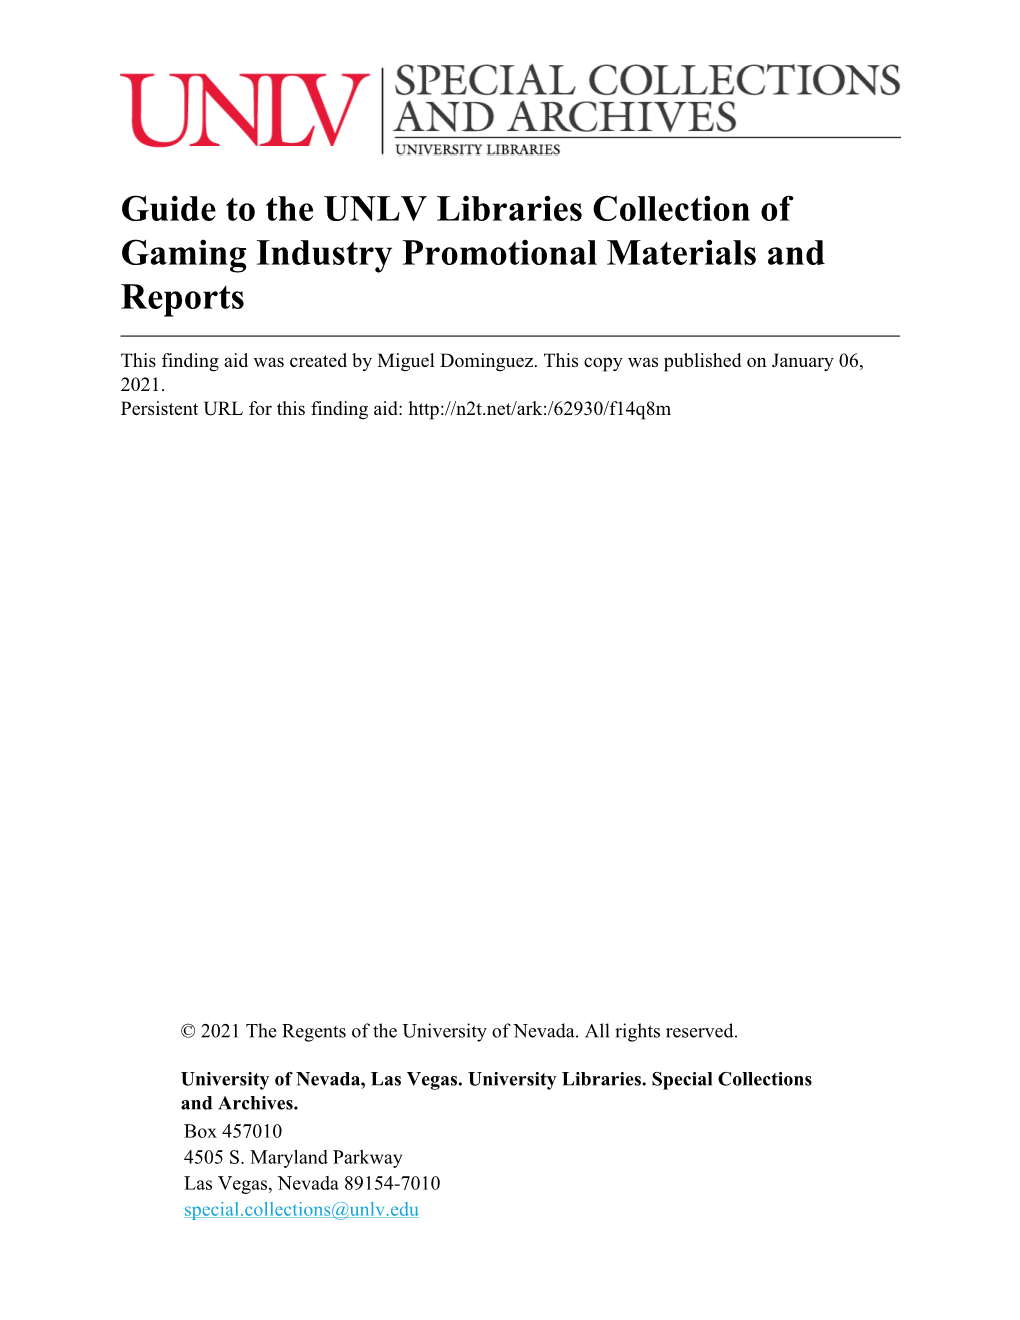 Guide to the UNLV Libraries Collection of Gaming Industry Promotional Materials and Reports